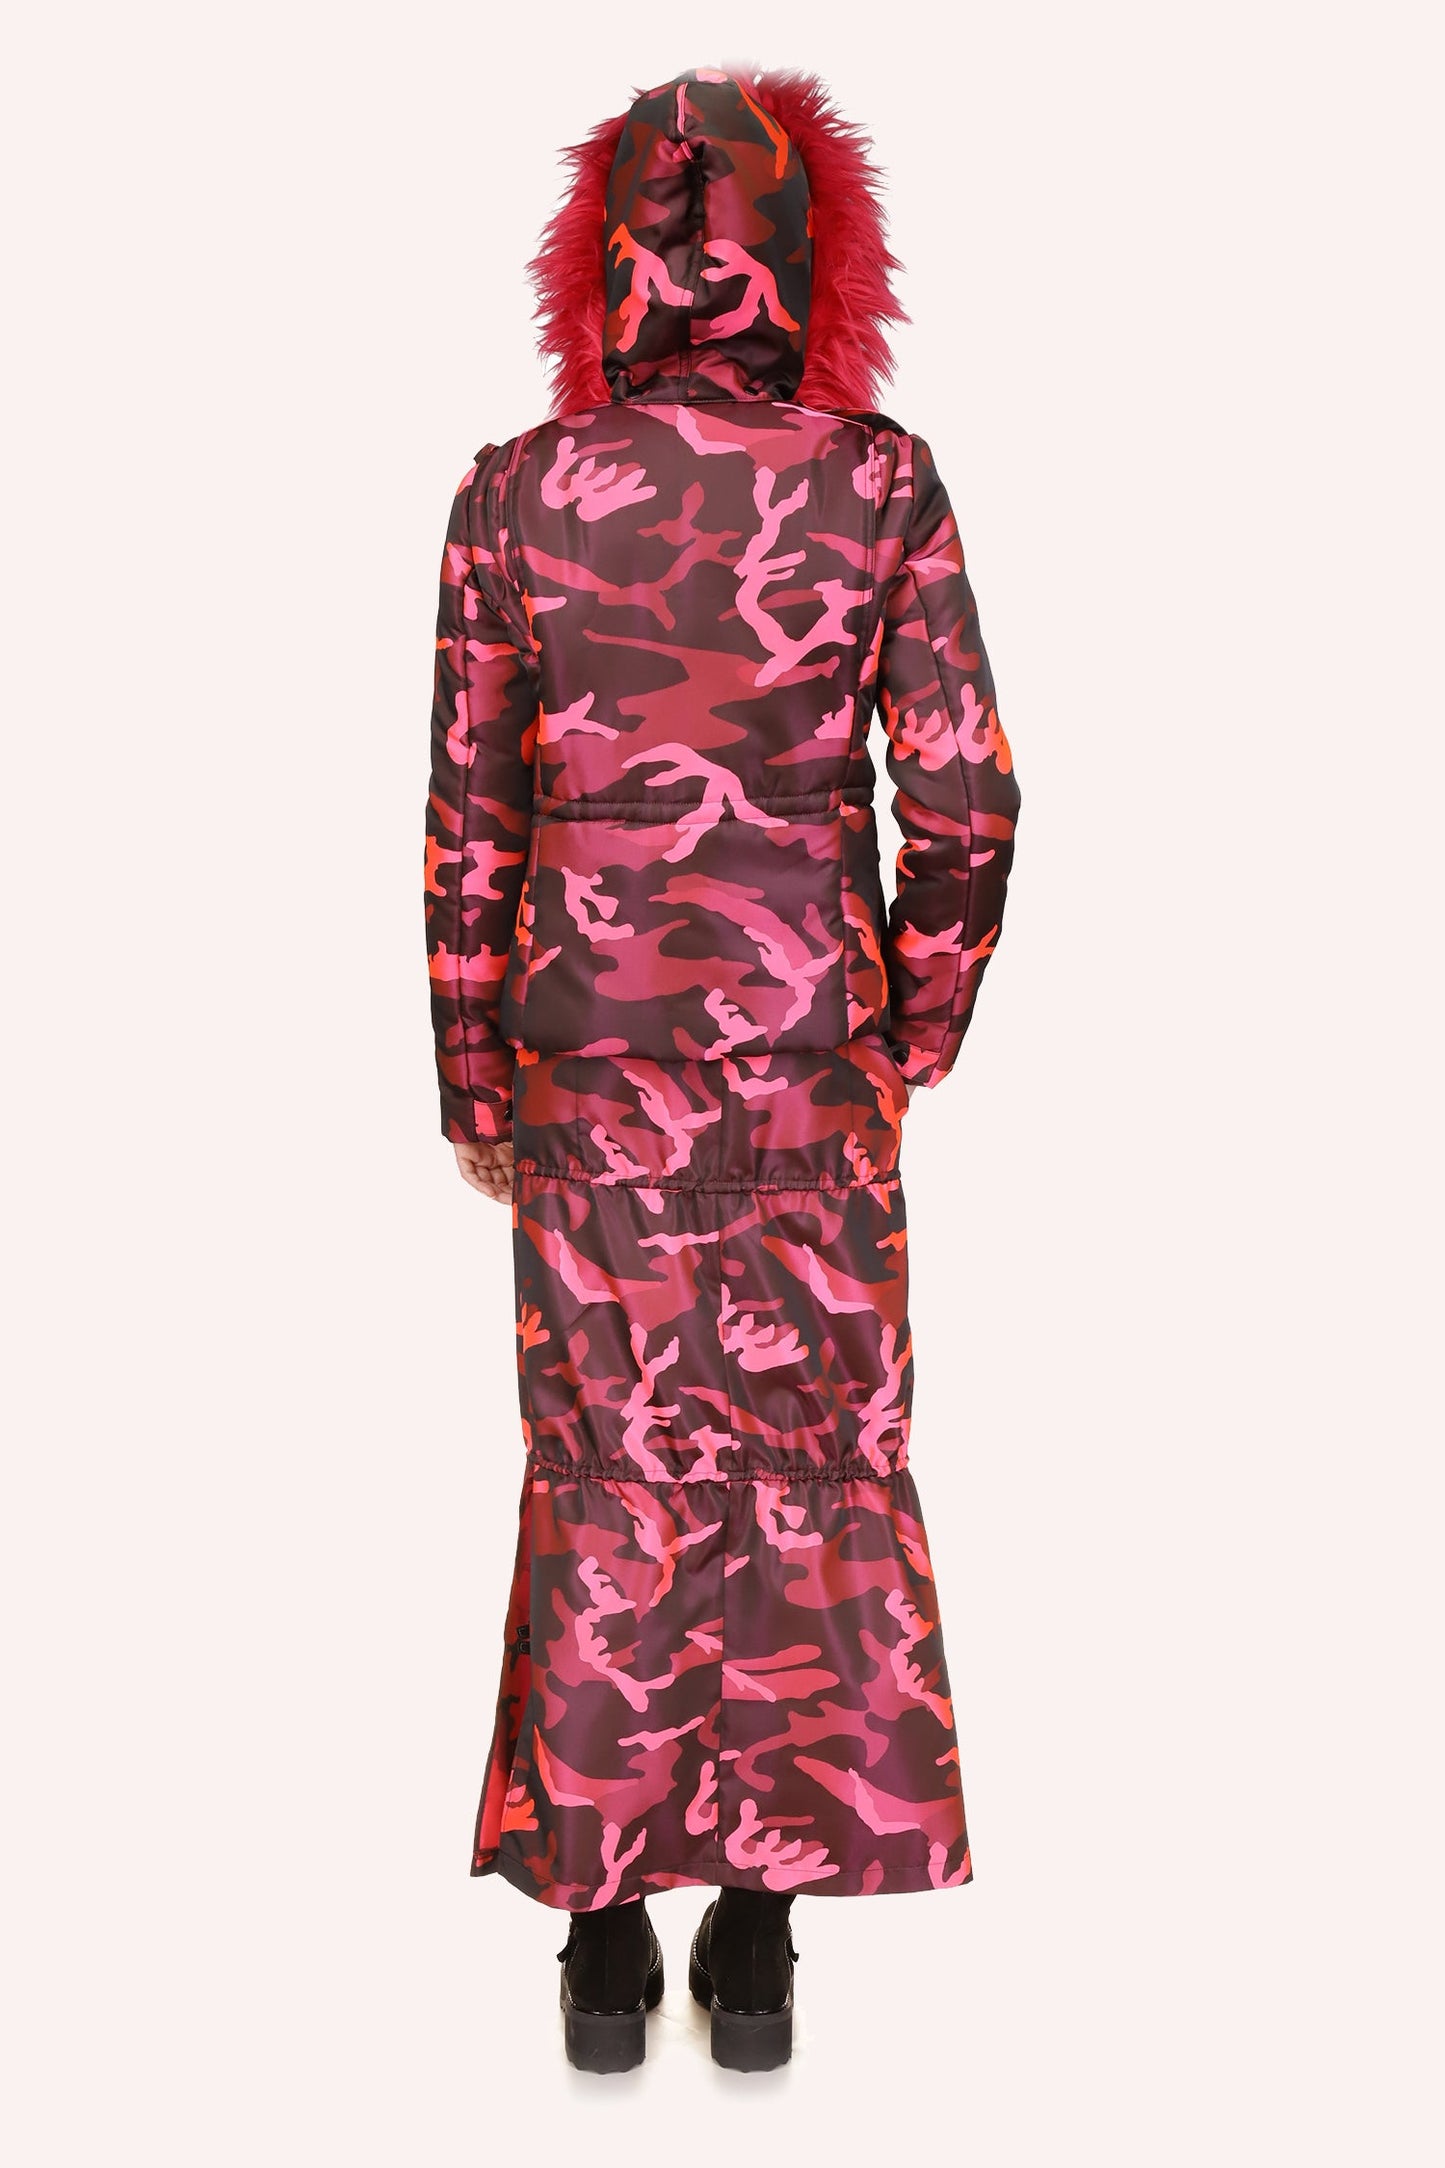 The Neon Camouflage jacket Hot Pink has a long hip-length with fluffy fur hood, and a waist belt